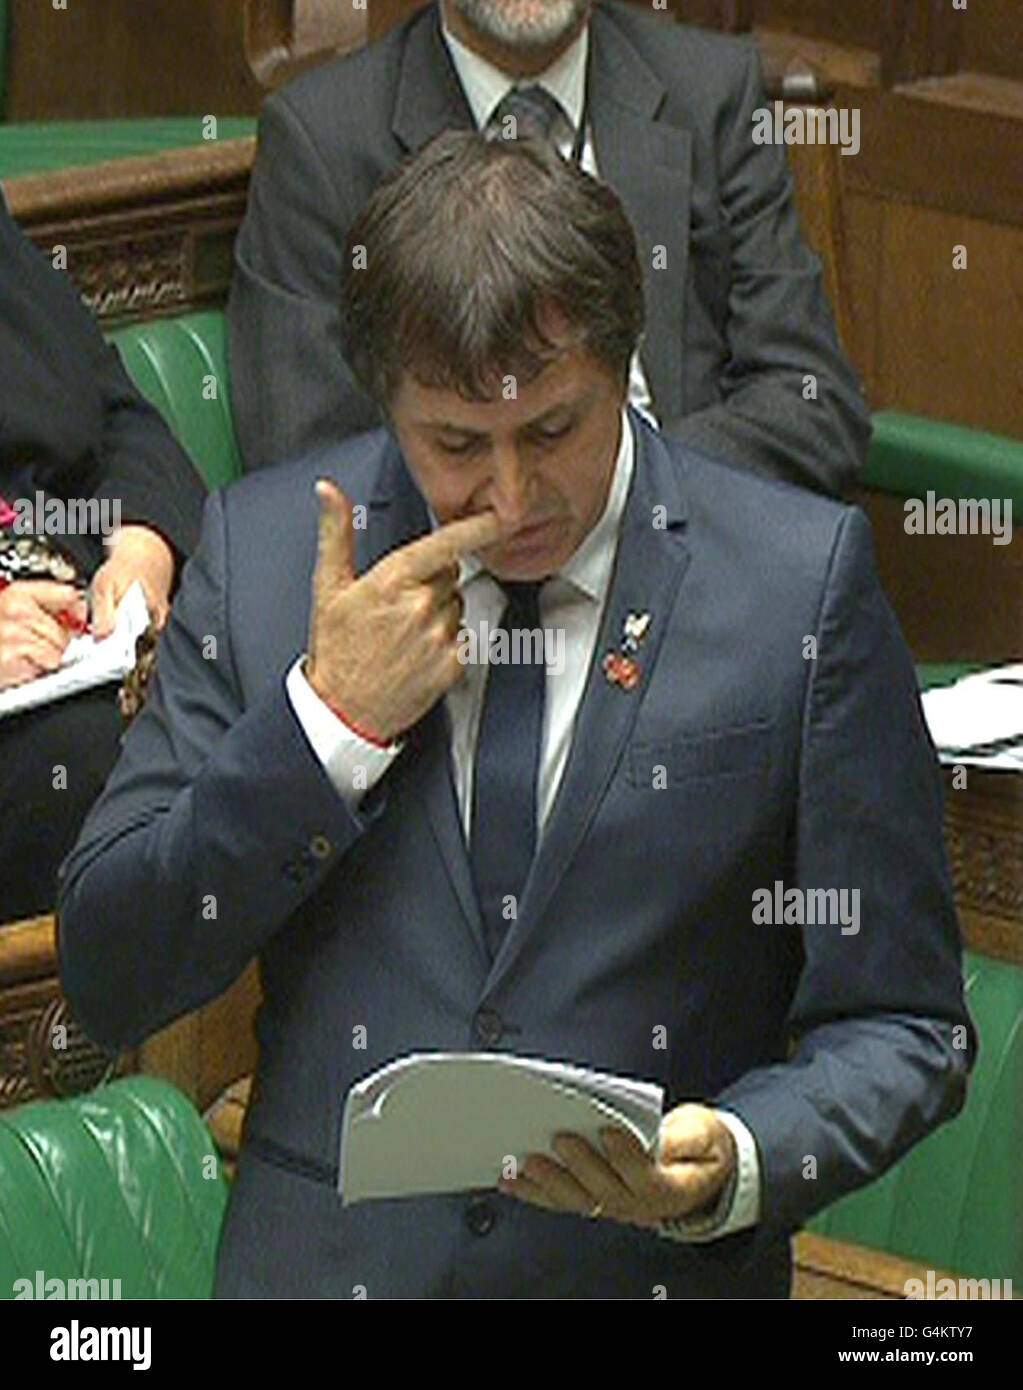 Liverpool Walton MP Steve Rotheram reads victims' names during a parliamentary debate on the 1989 Hillsborough disaster which claimed the lives of 96 Liverpool fans. Stock Photo